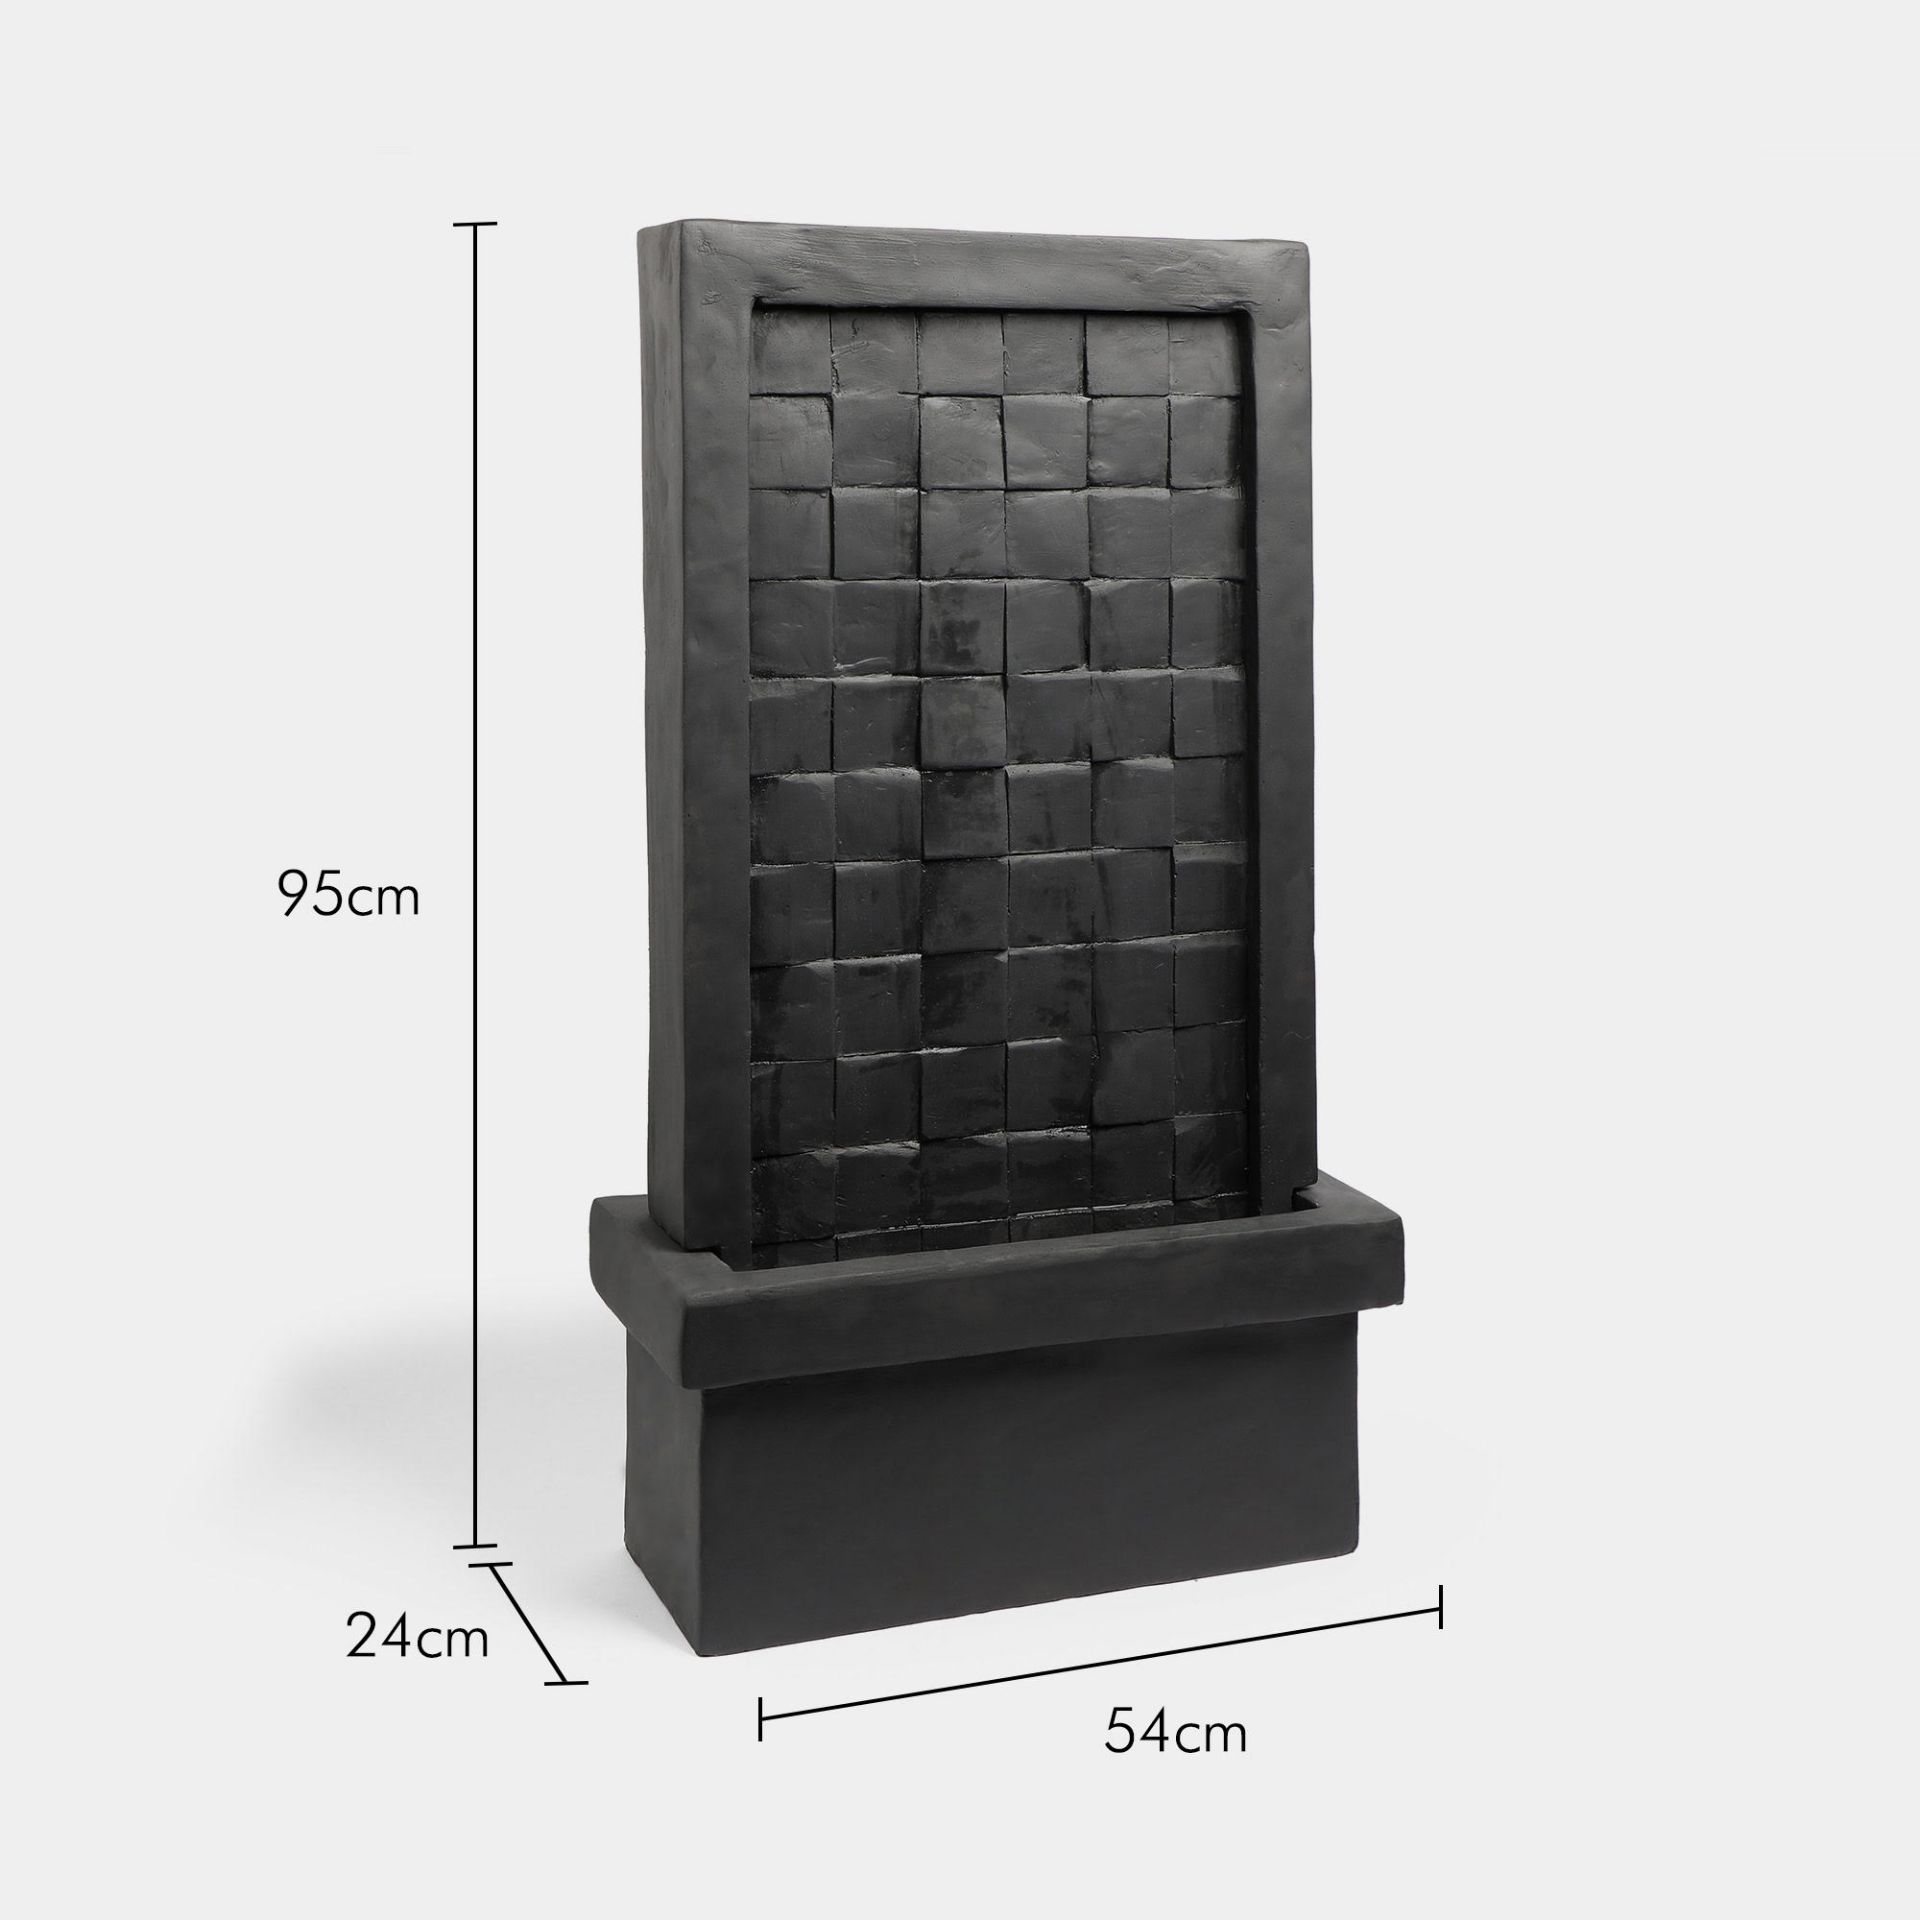 New & Boxed Tiled Waterfall Water Feature - Tall LED Wall Lit Cascading Water Fountain. RRP £349.99. - Image 4 of 6